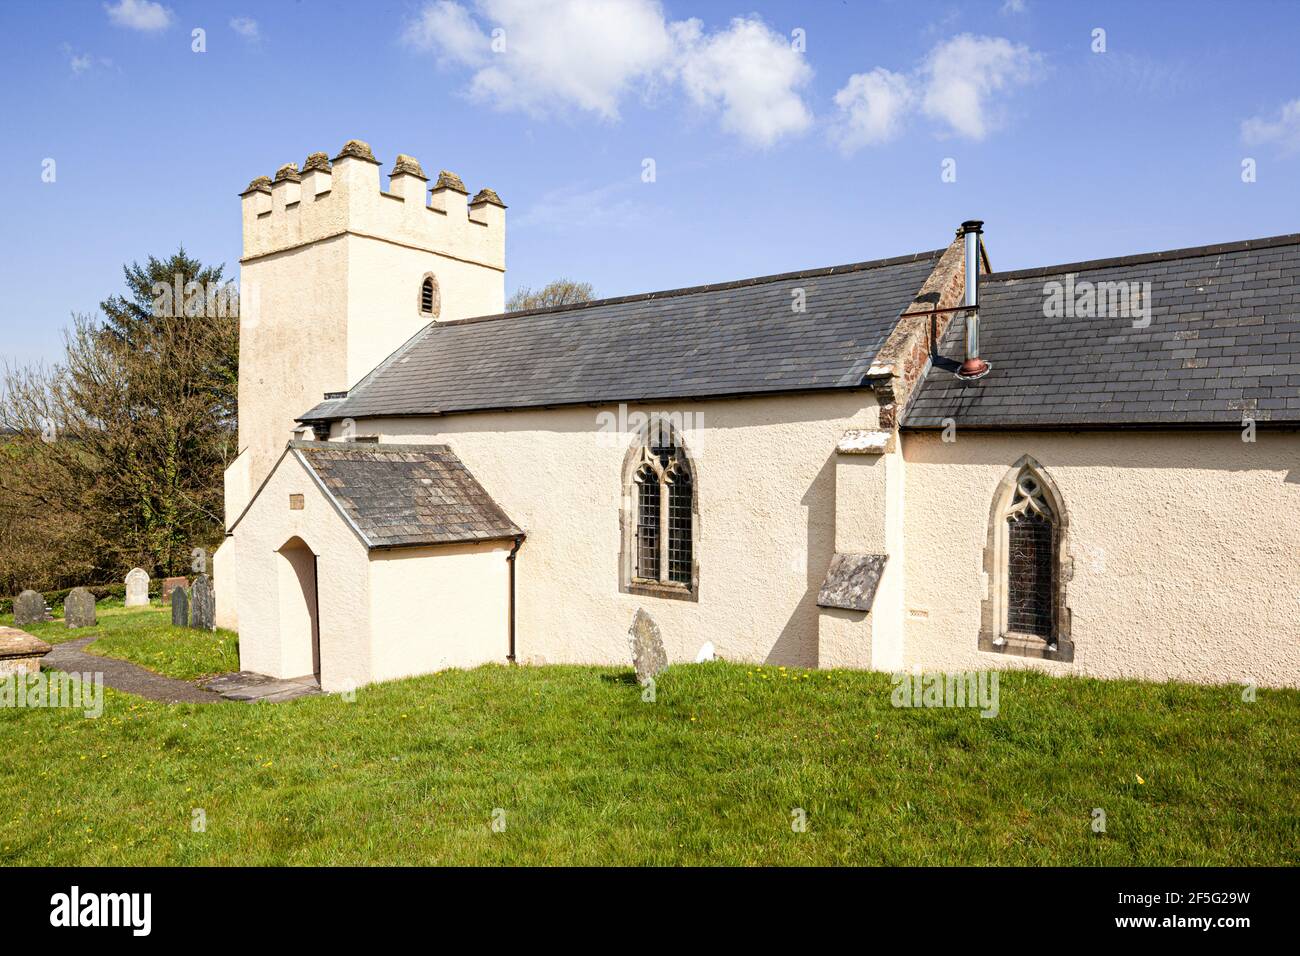 The 15th century church of St Mary Magdalene in the delighfully named Exmoor hamlet of Withiel Florey, Somerset UK Stock Photo